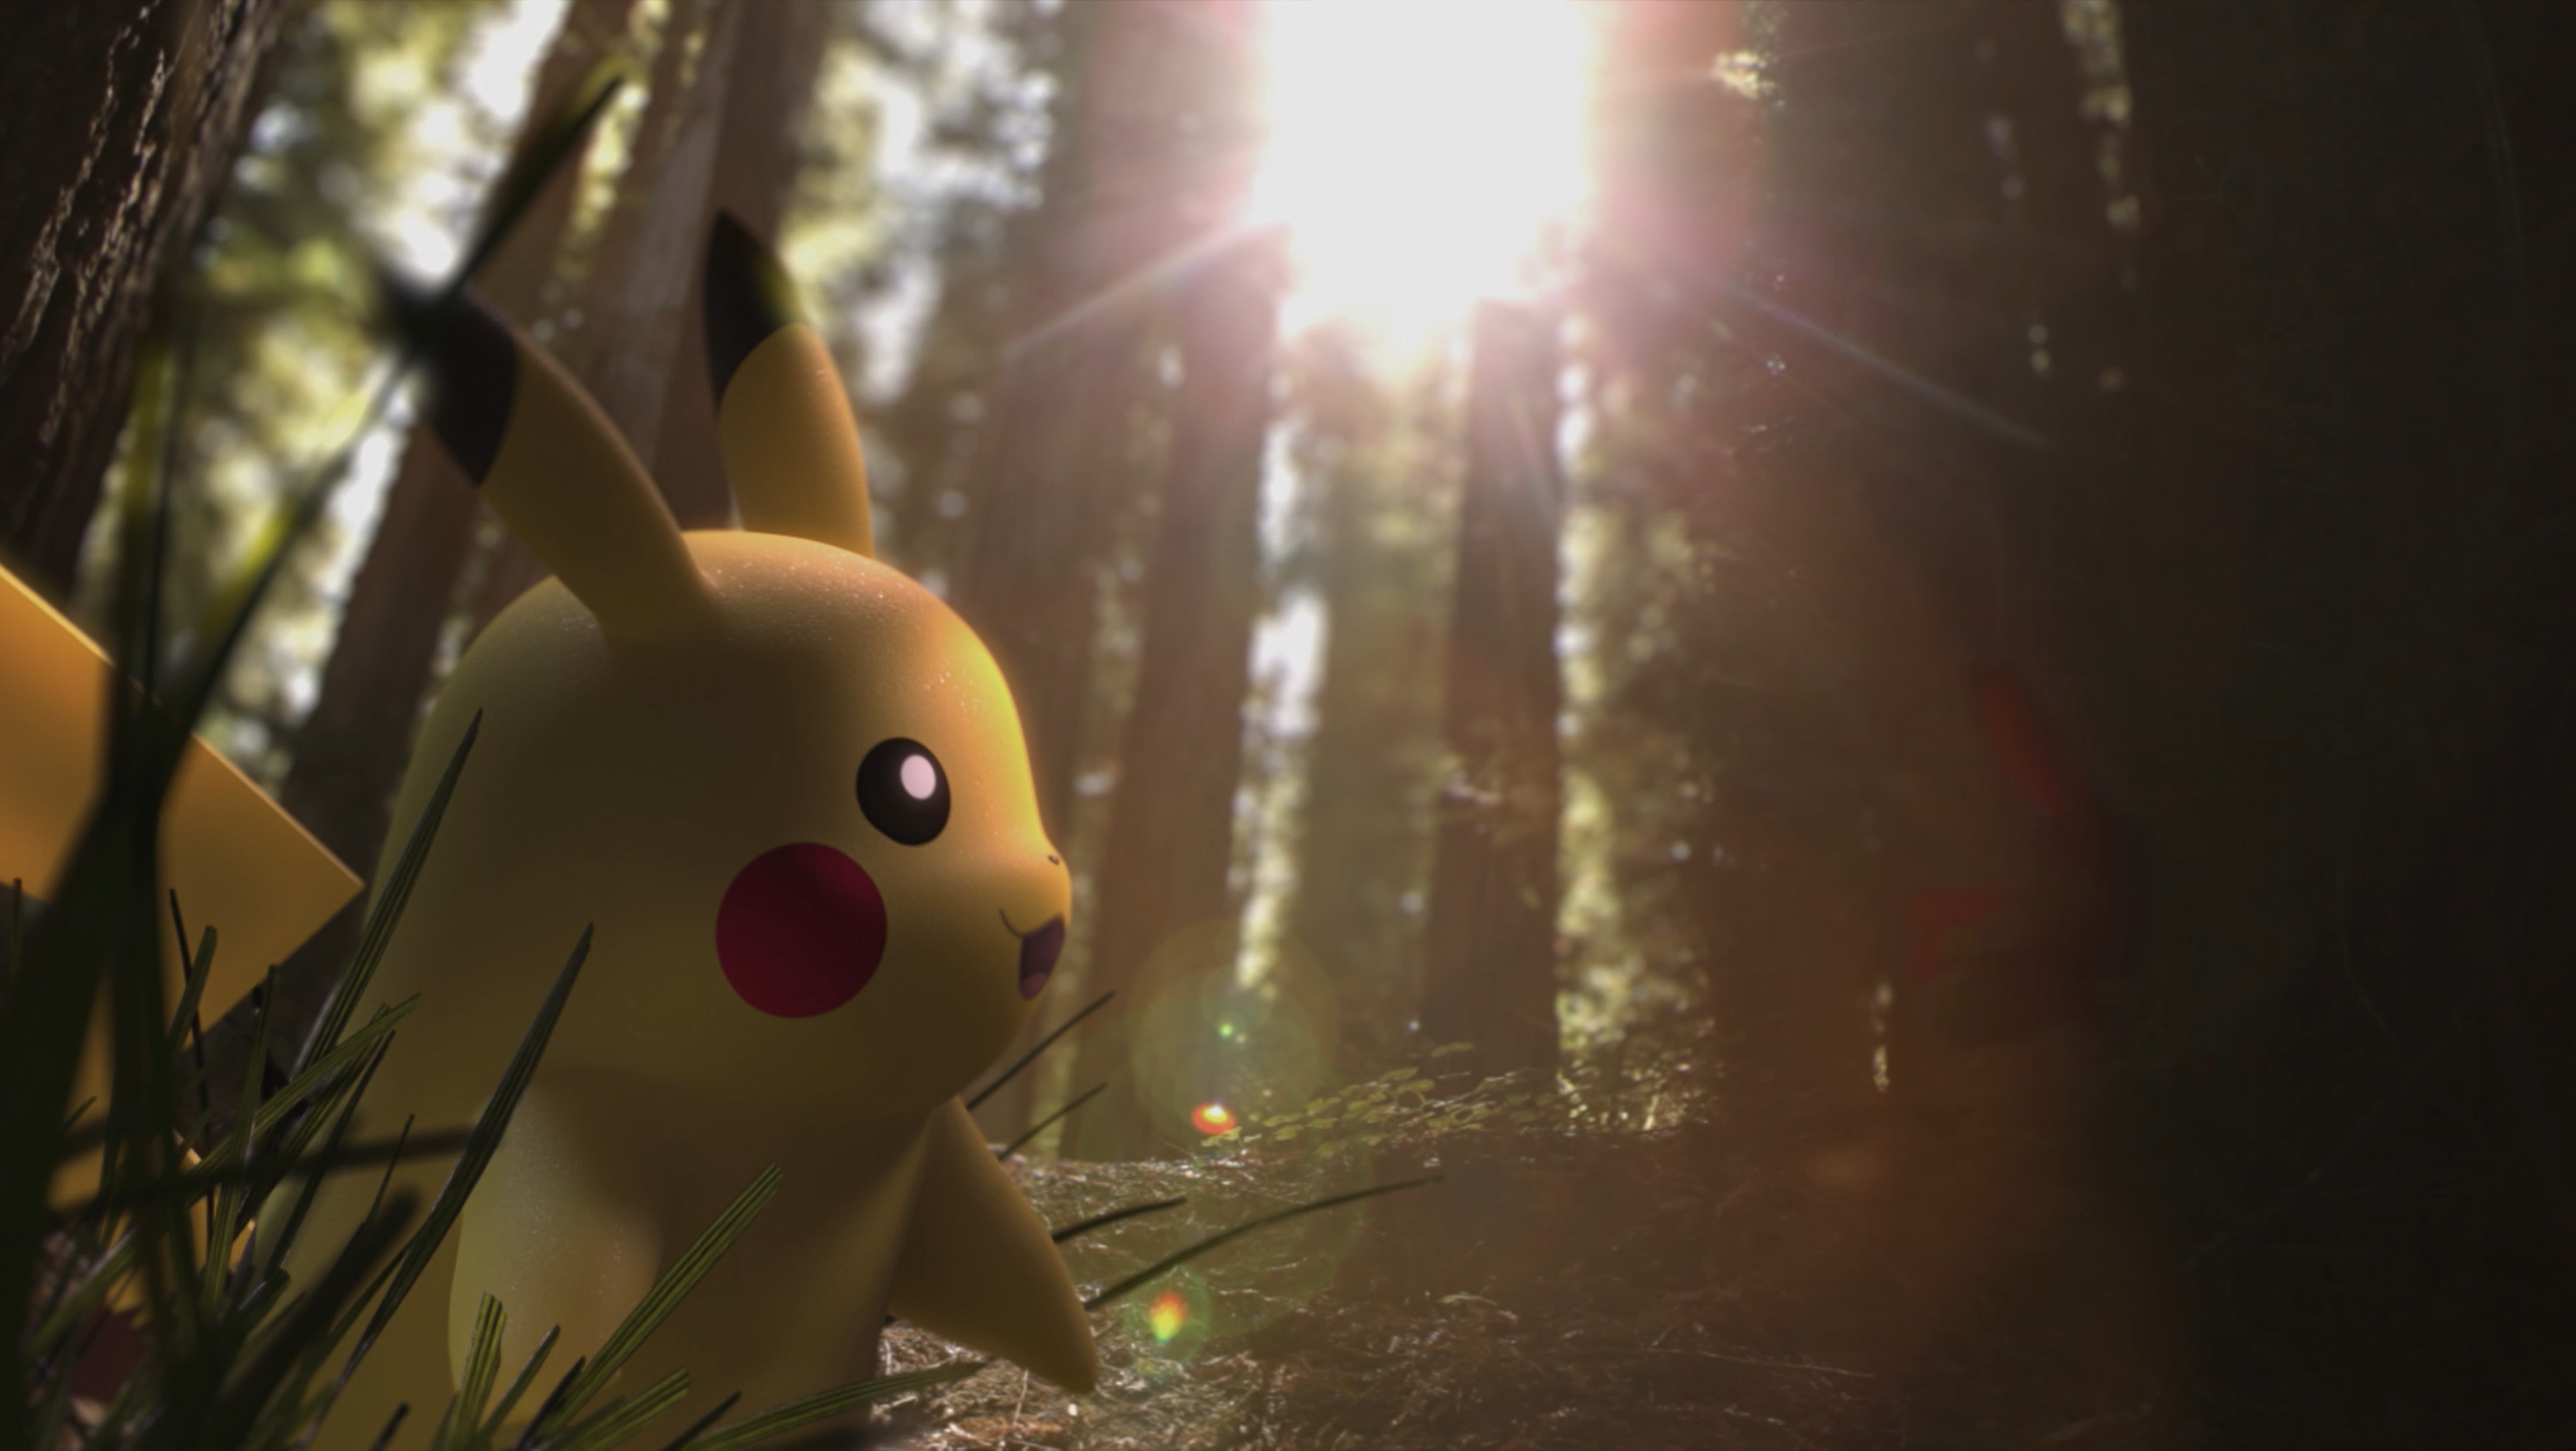 Pokemon Go best Pokemon: Pikachu with a happy expression walking through the woods with the sun poking through the trees.